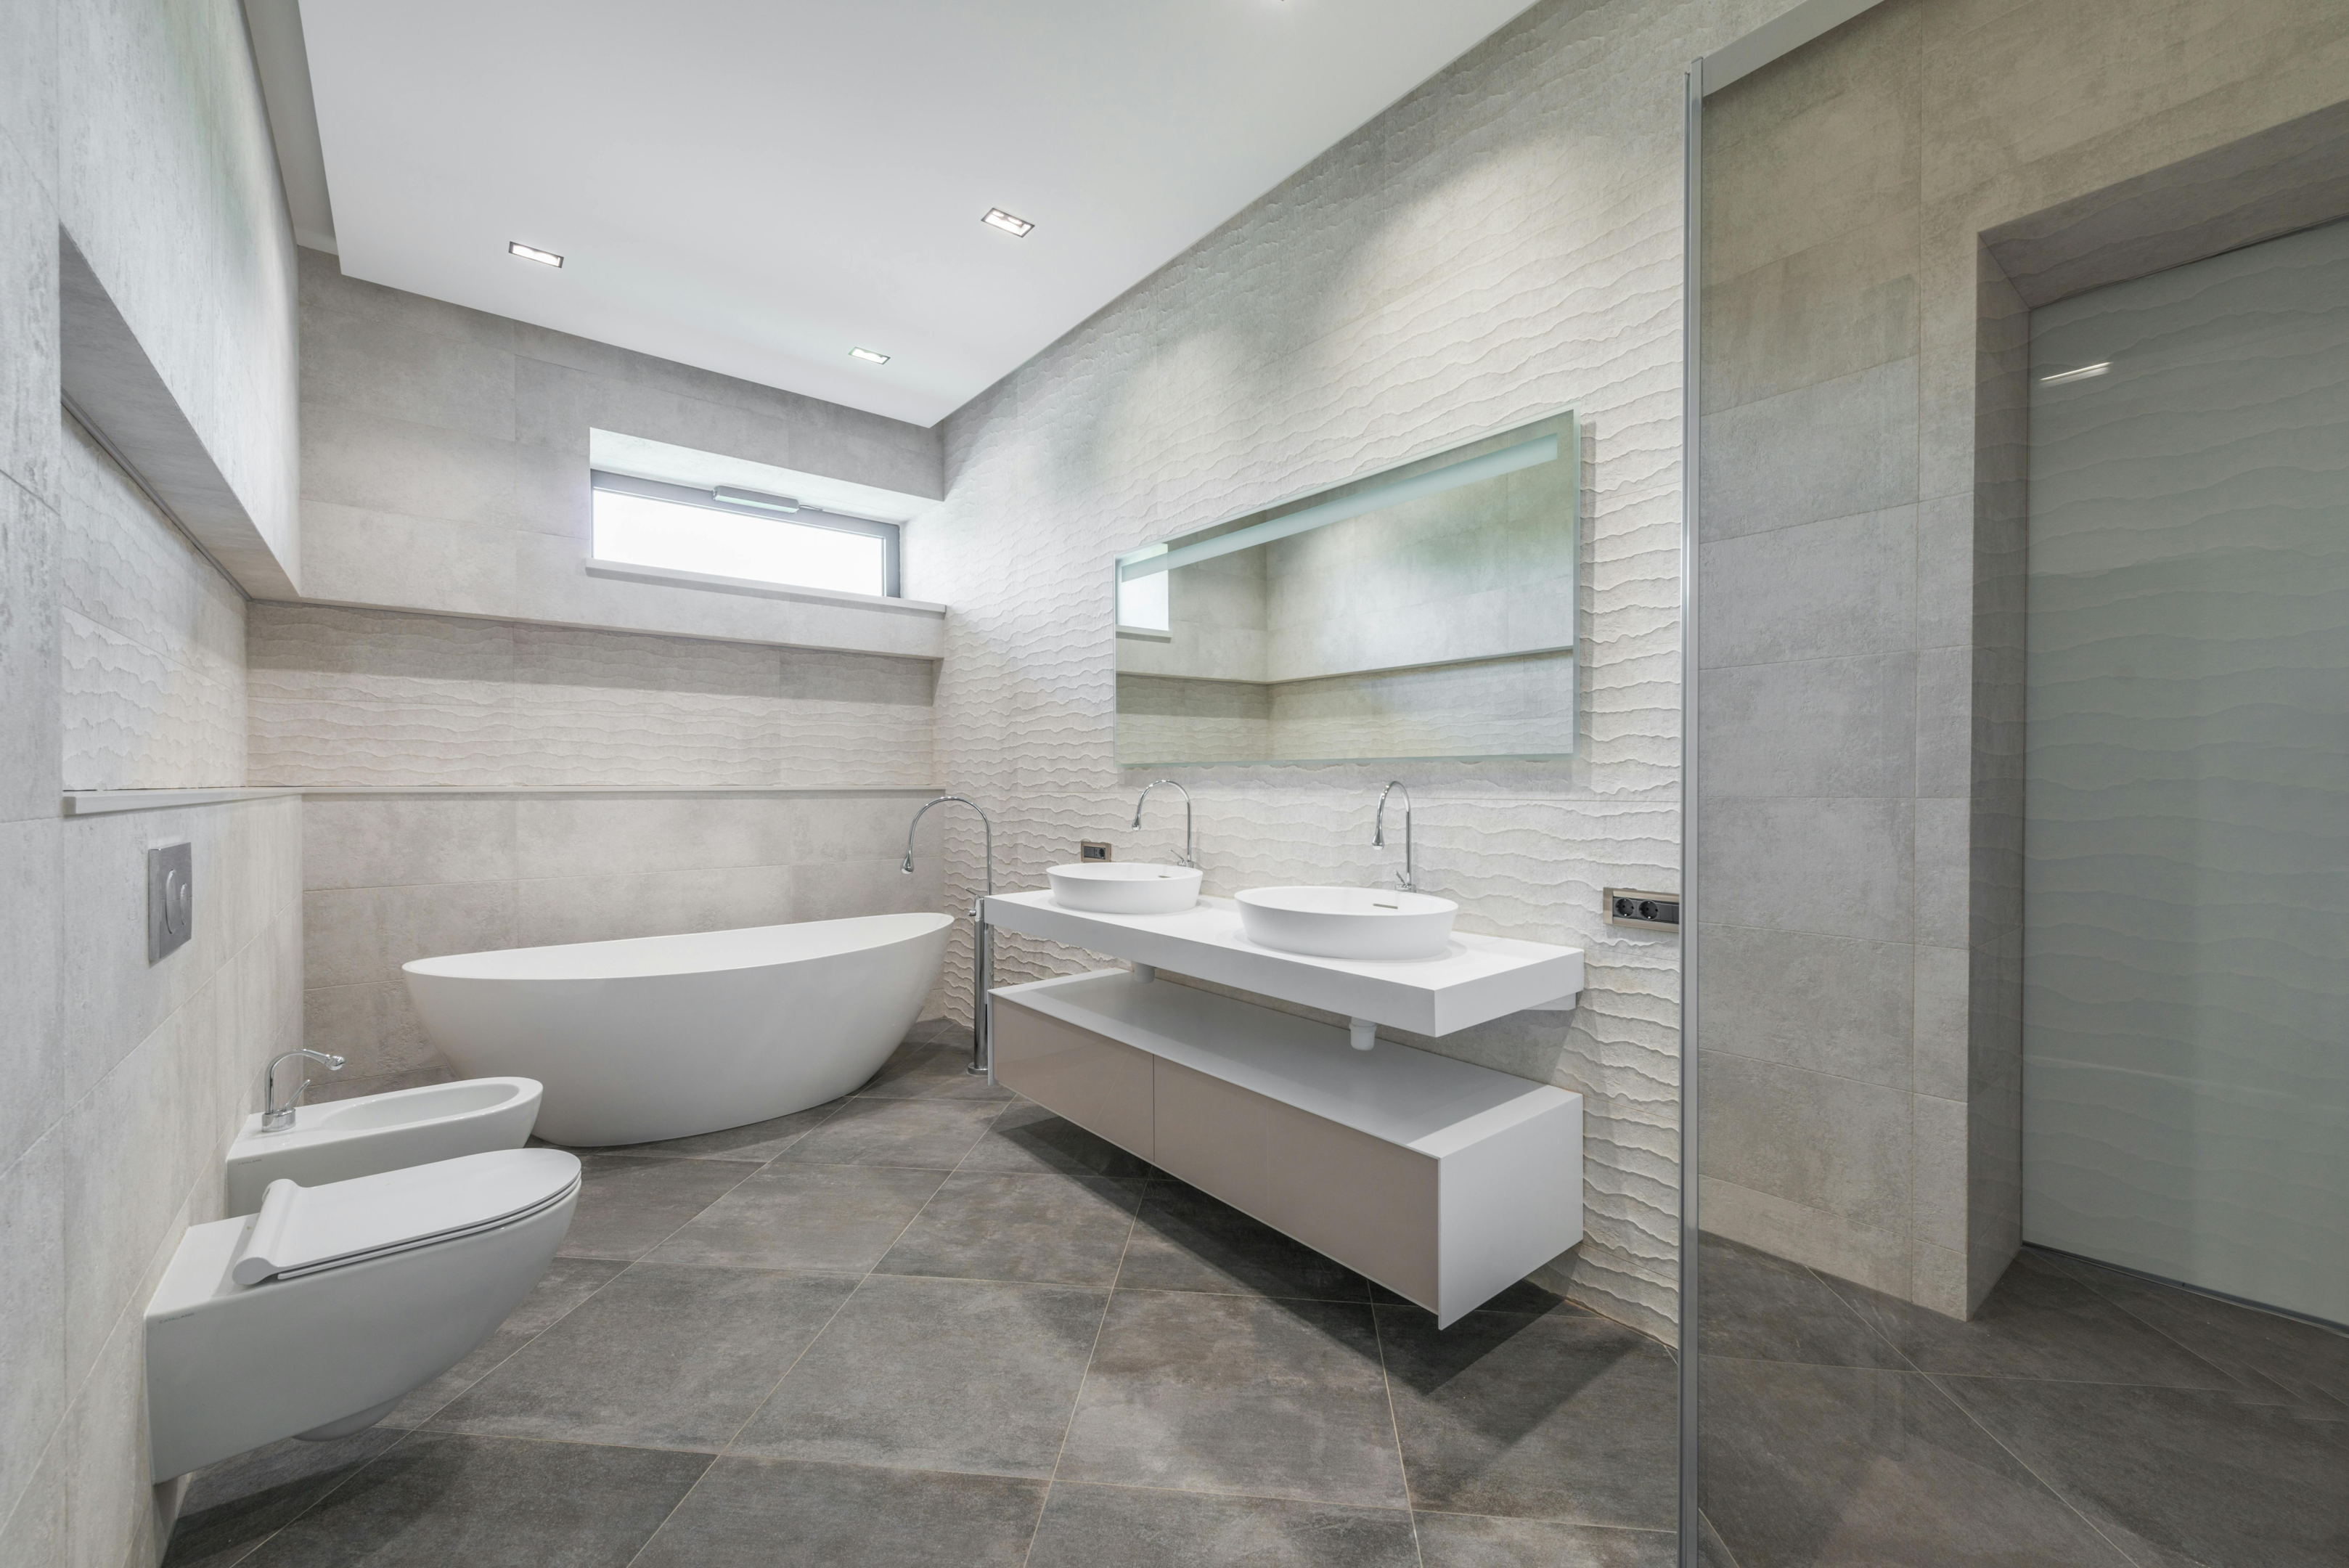 Choose the Right Tile for Your Bathroom